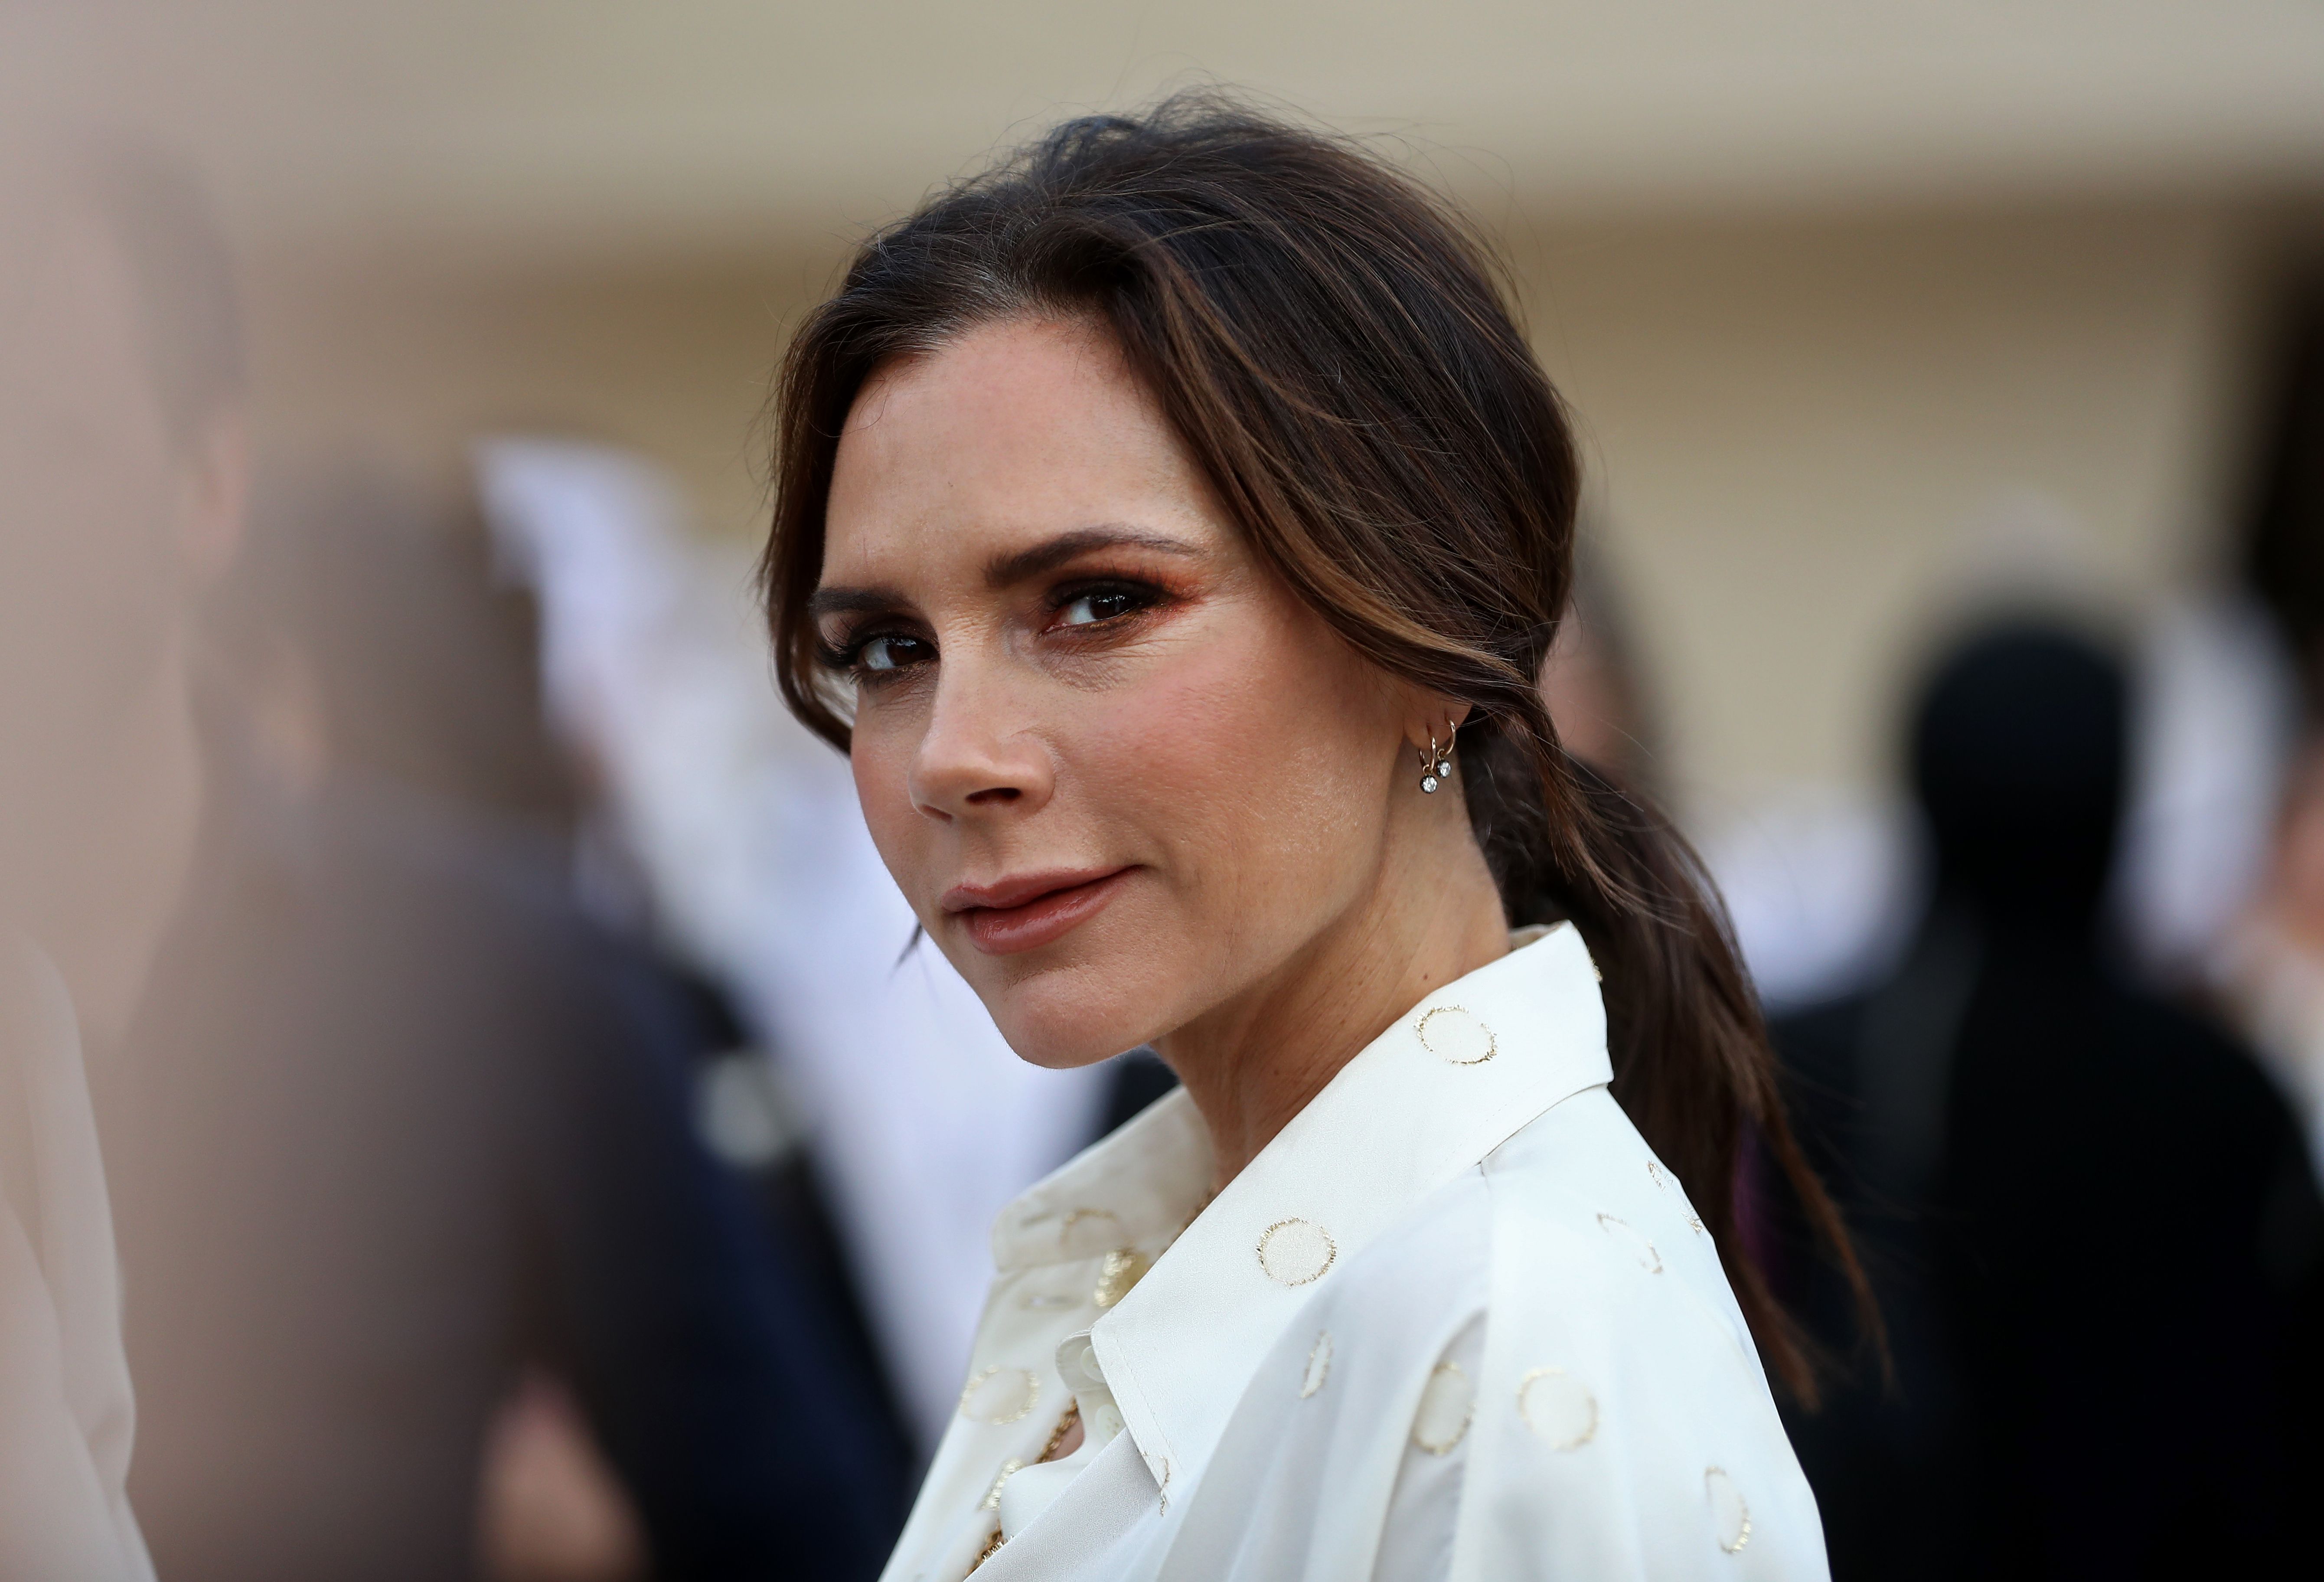 Victoria Beckham Shares Her Secret to a Long Marriage With David